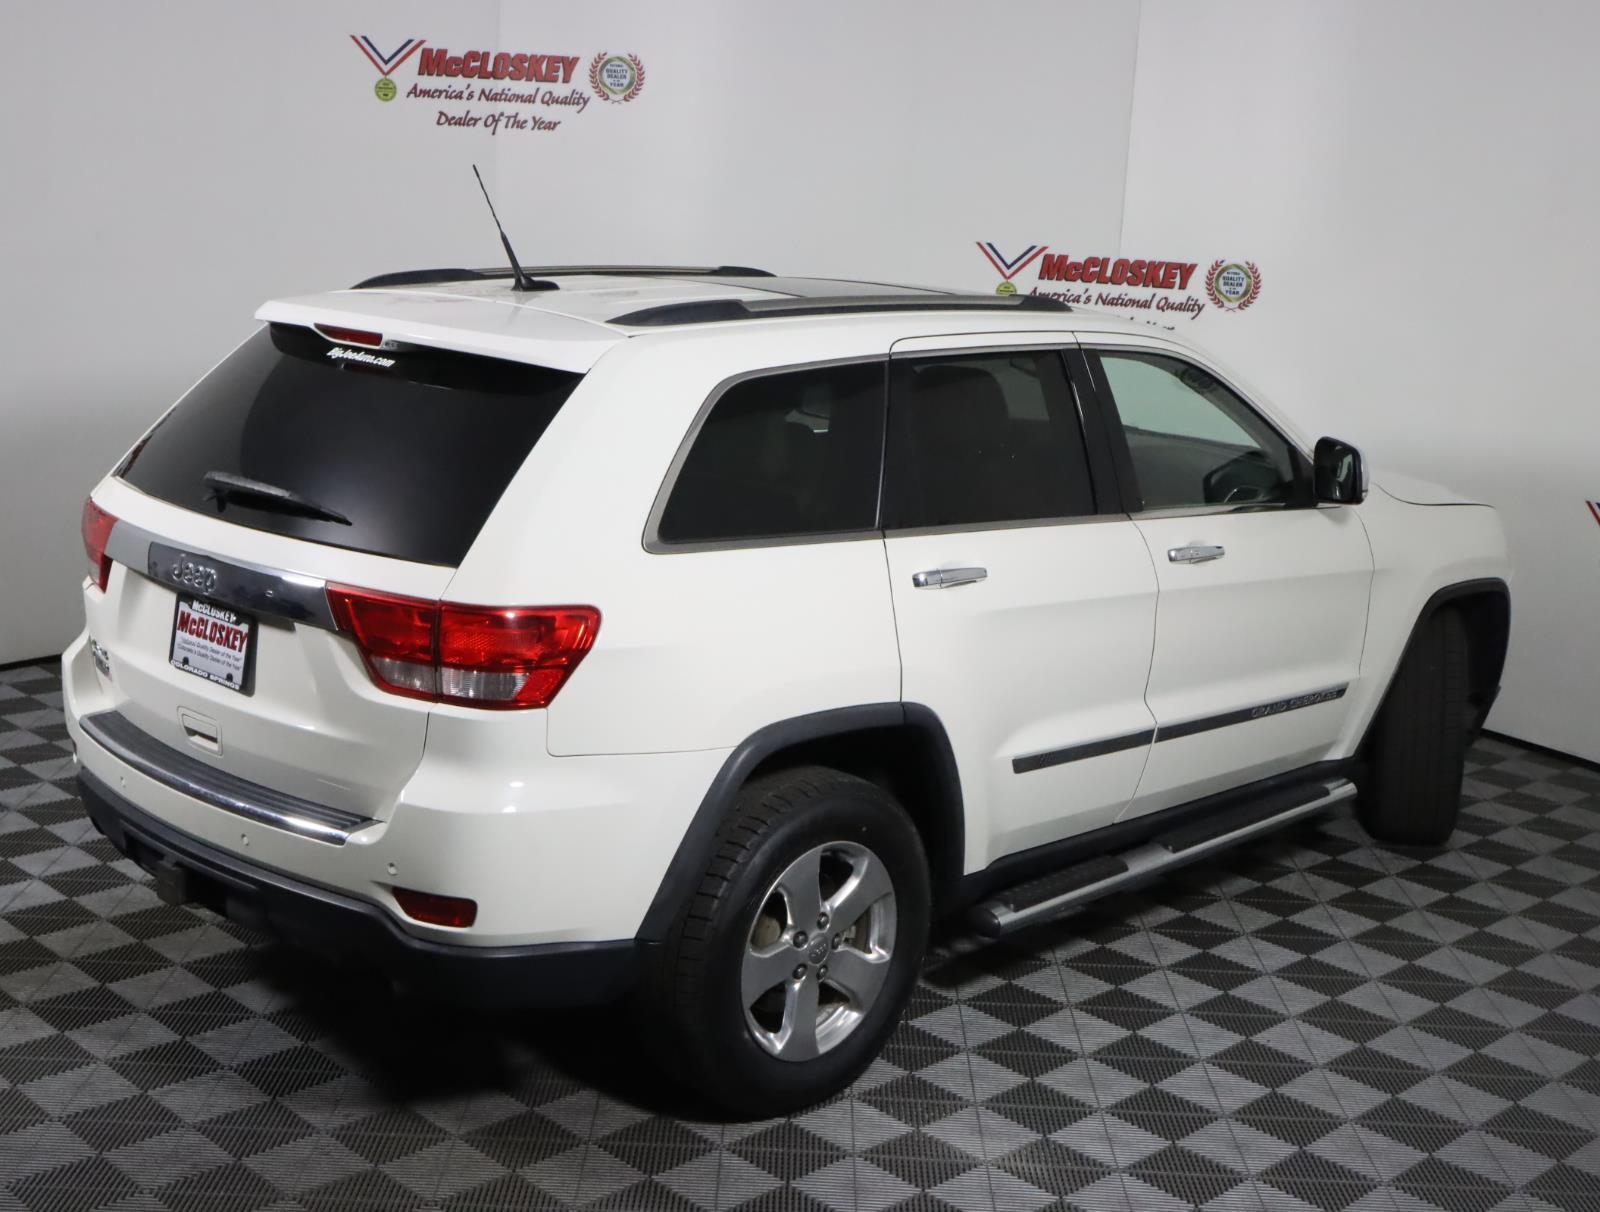 Preowned 2011 Jeep Grand Cherokee Limited GREAT MILES! CLEAN! PANORAMIC ROOF! 4WD! for sale by McCloskey Imports & 4X4's in Colorado Springs, CO